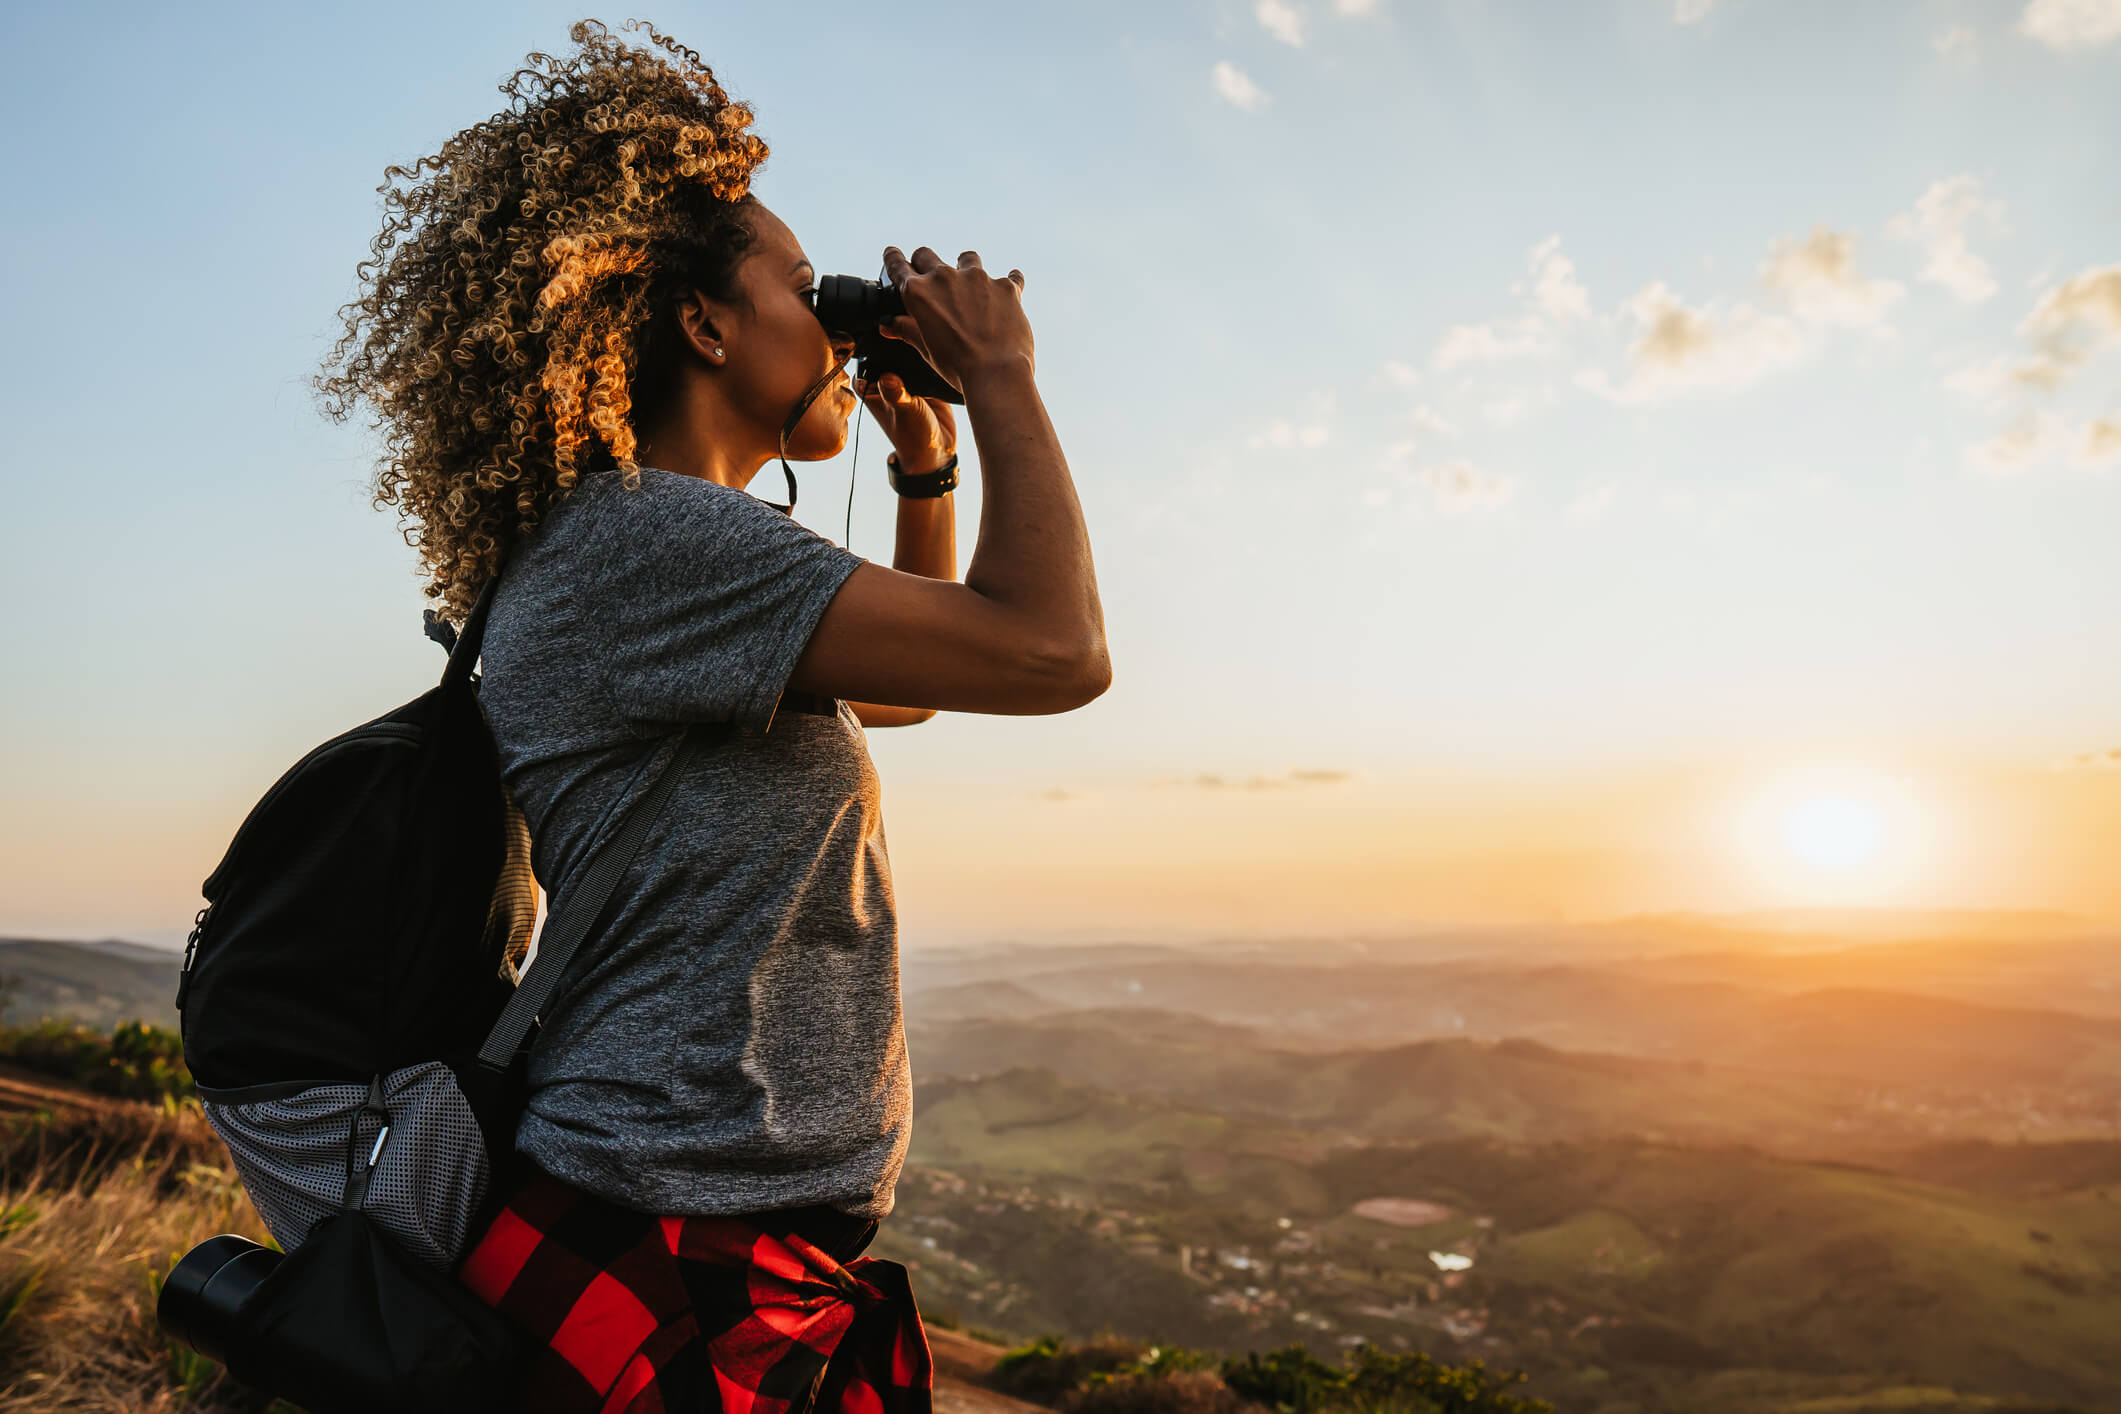 A woman on top of a ridge or mountain looking through binoculars with the sunrise in the background.